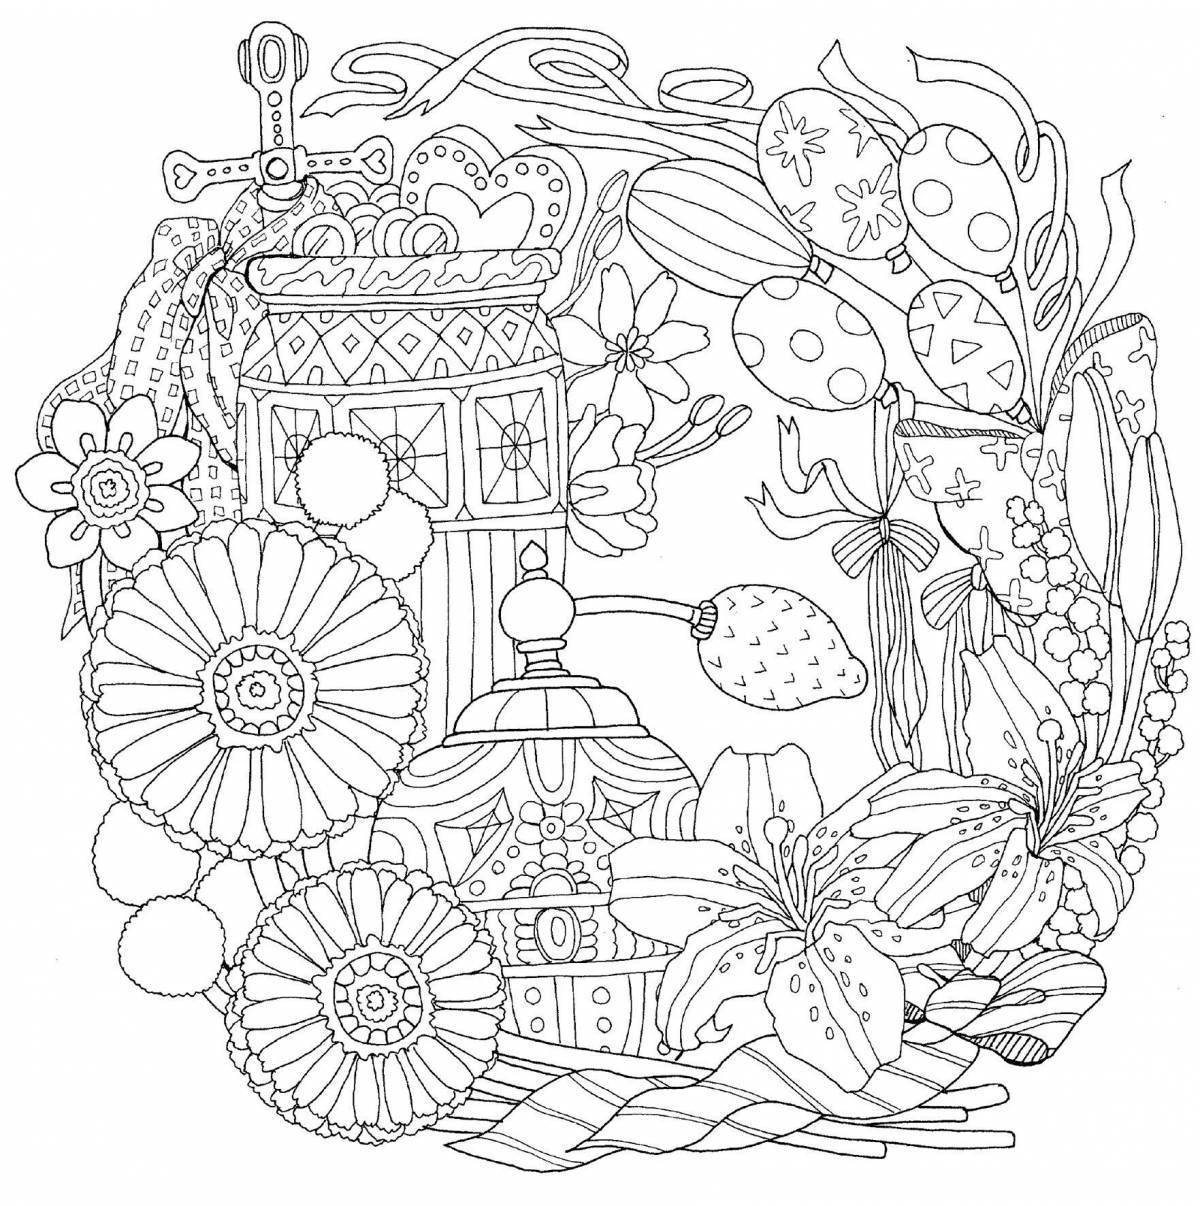 Exciting travel coloring book